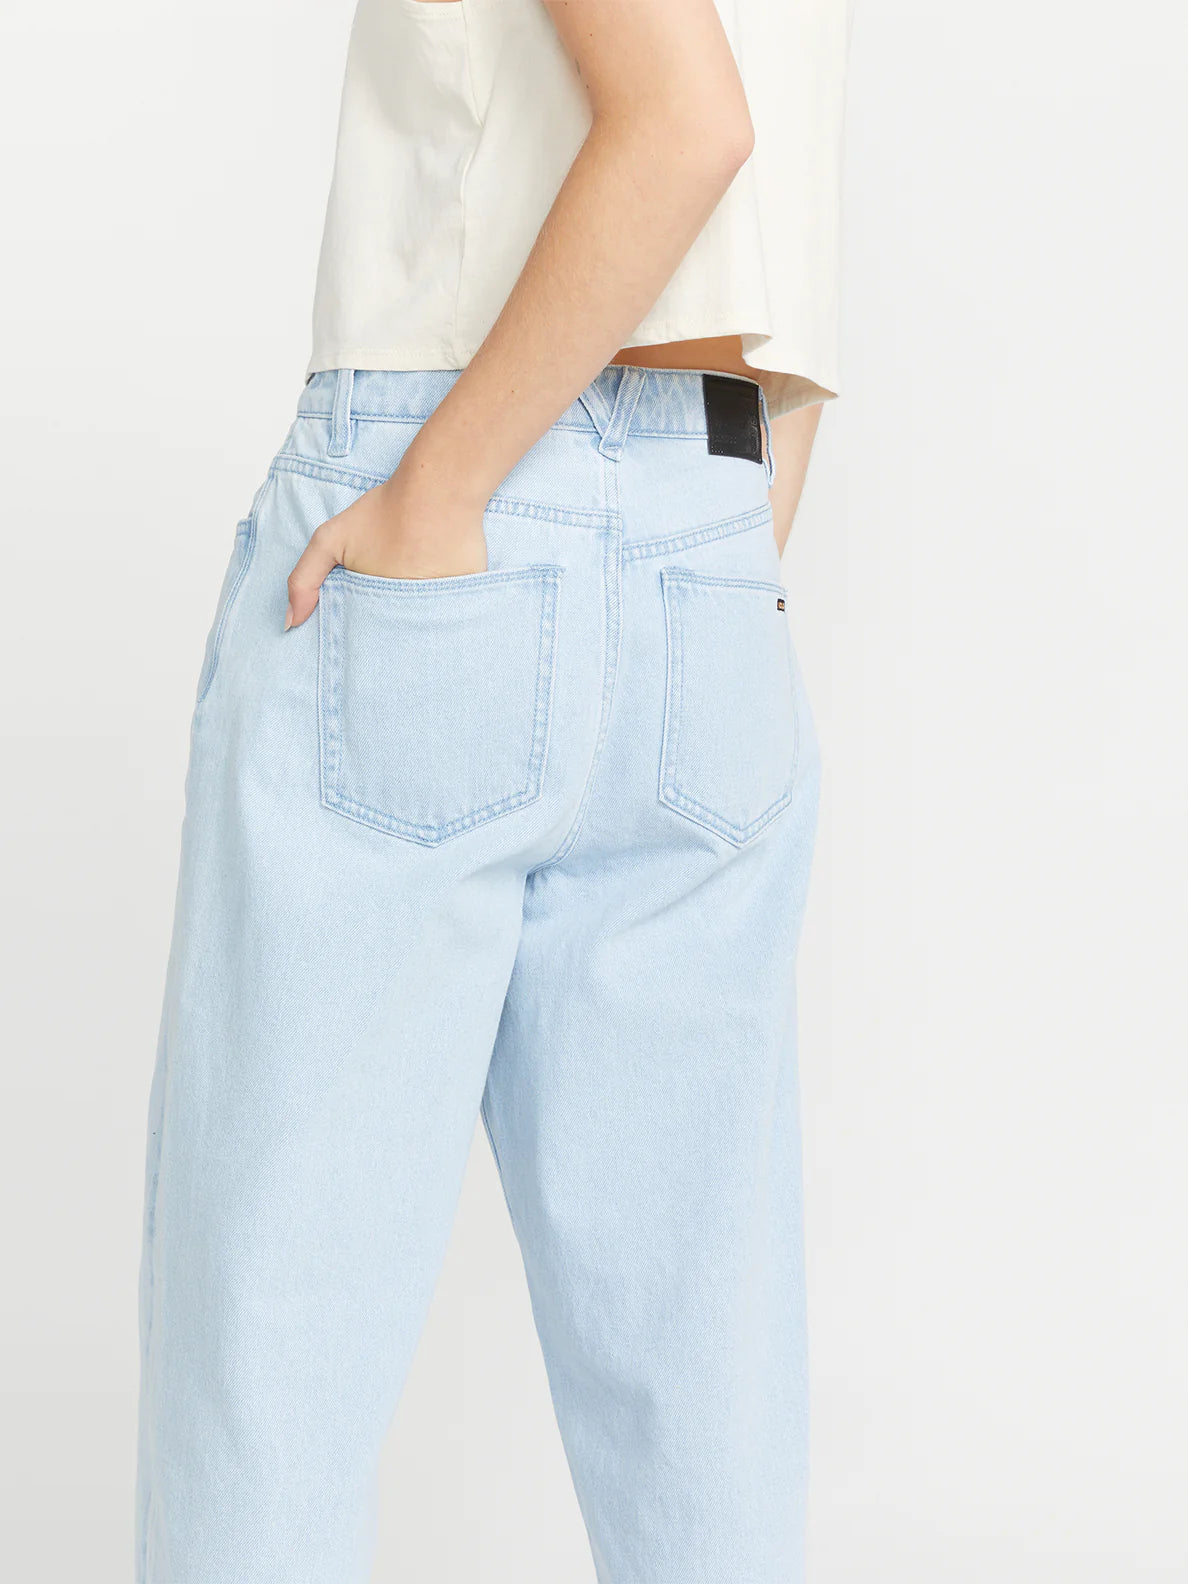 Load image into Gallery viewer, Volcom Weellow Denim Pants - Light Blue
